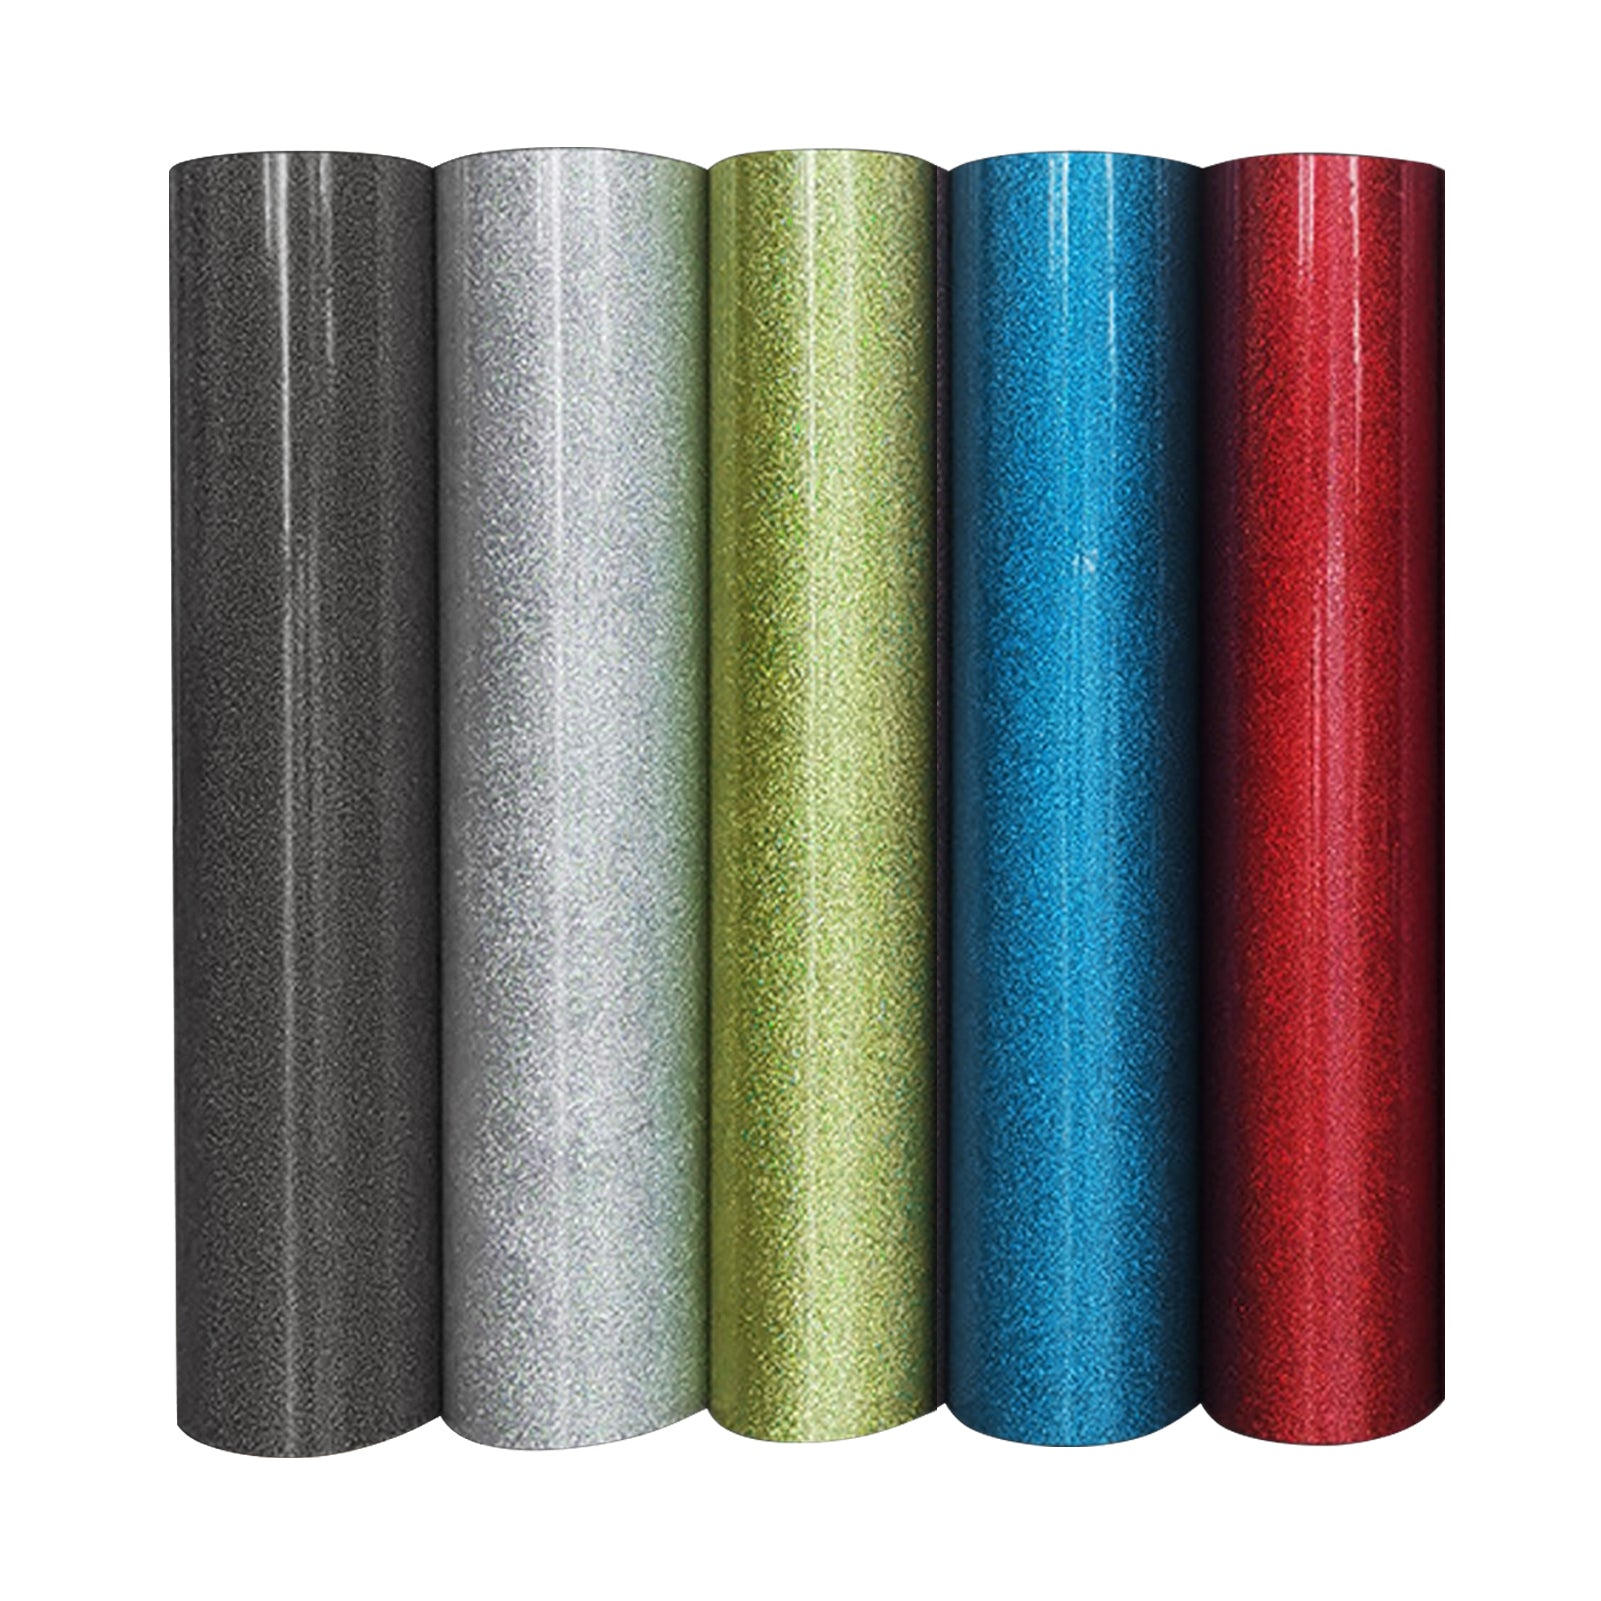 Five rolls of 10pcs HTV Heat Transfer Vinyl Paper for Falcon Laser Engraving stand upright in a row. From left to right, the colors are black, silver, green, blue, and red. Each roll has a shiny, sparkly finish perfect for customizing with your CrealityFalcon laser engraver.